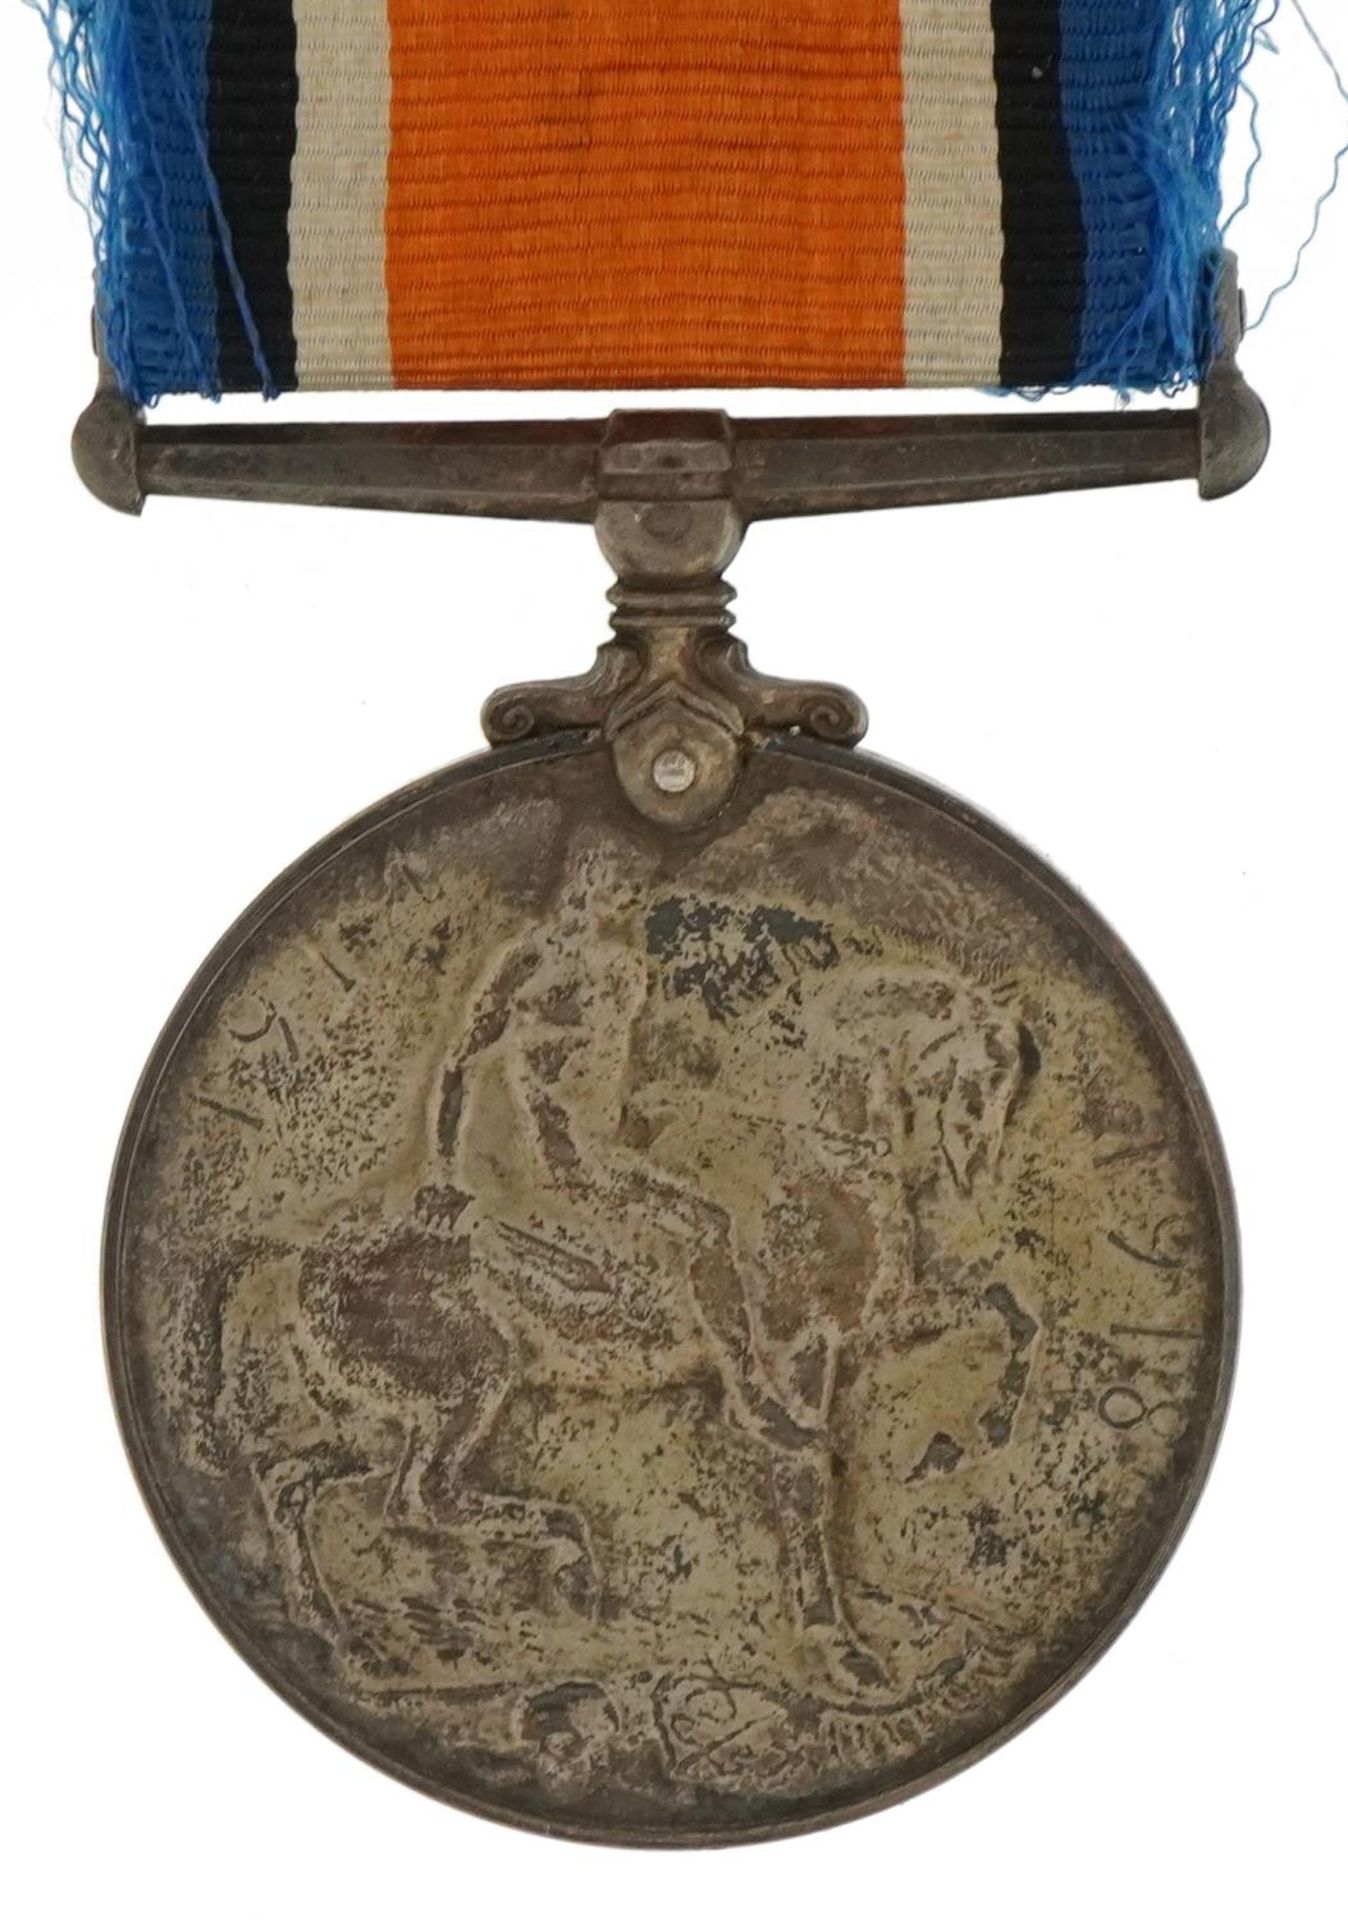 British military World War I 1914-18 war medal awarded to W.H.THOMAS.SERVICEWITHTHEROYALNAVY. : - Image 3 of 4